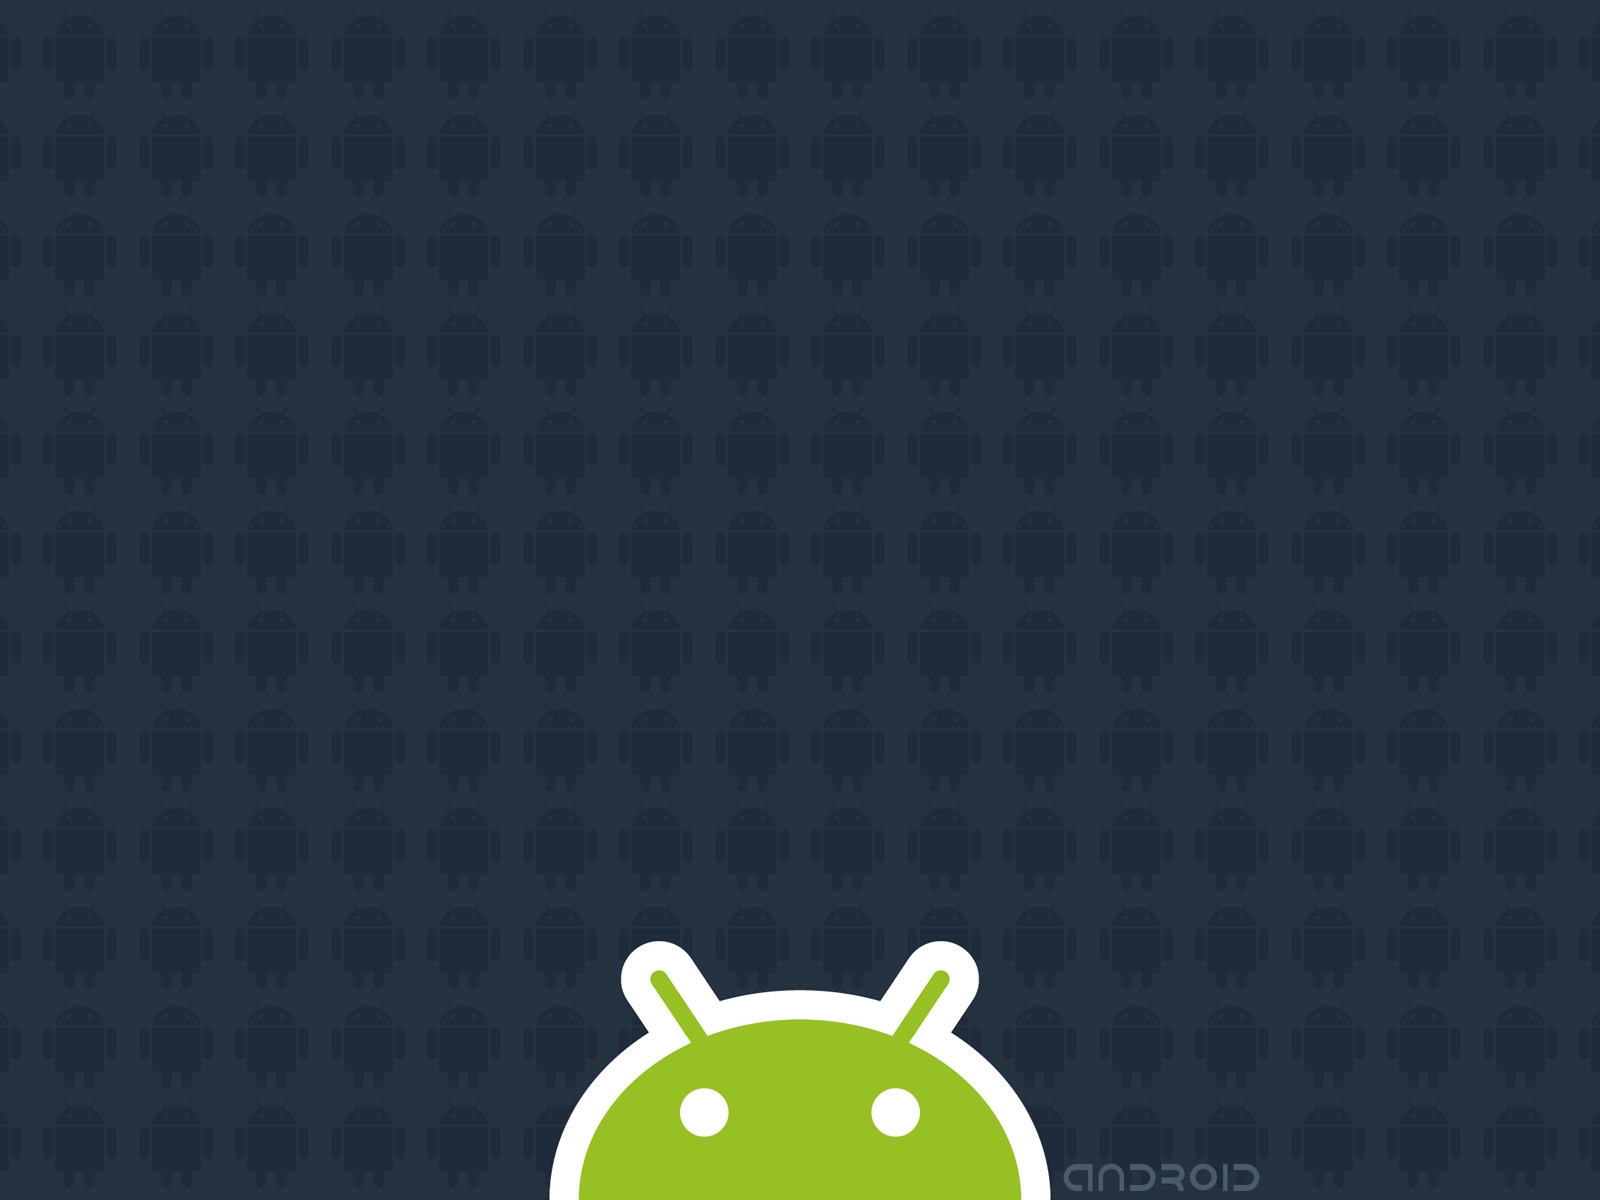 Android Pattern for 1600 x 1200 resolution